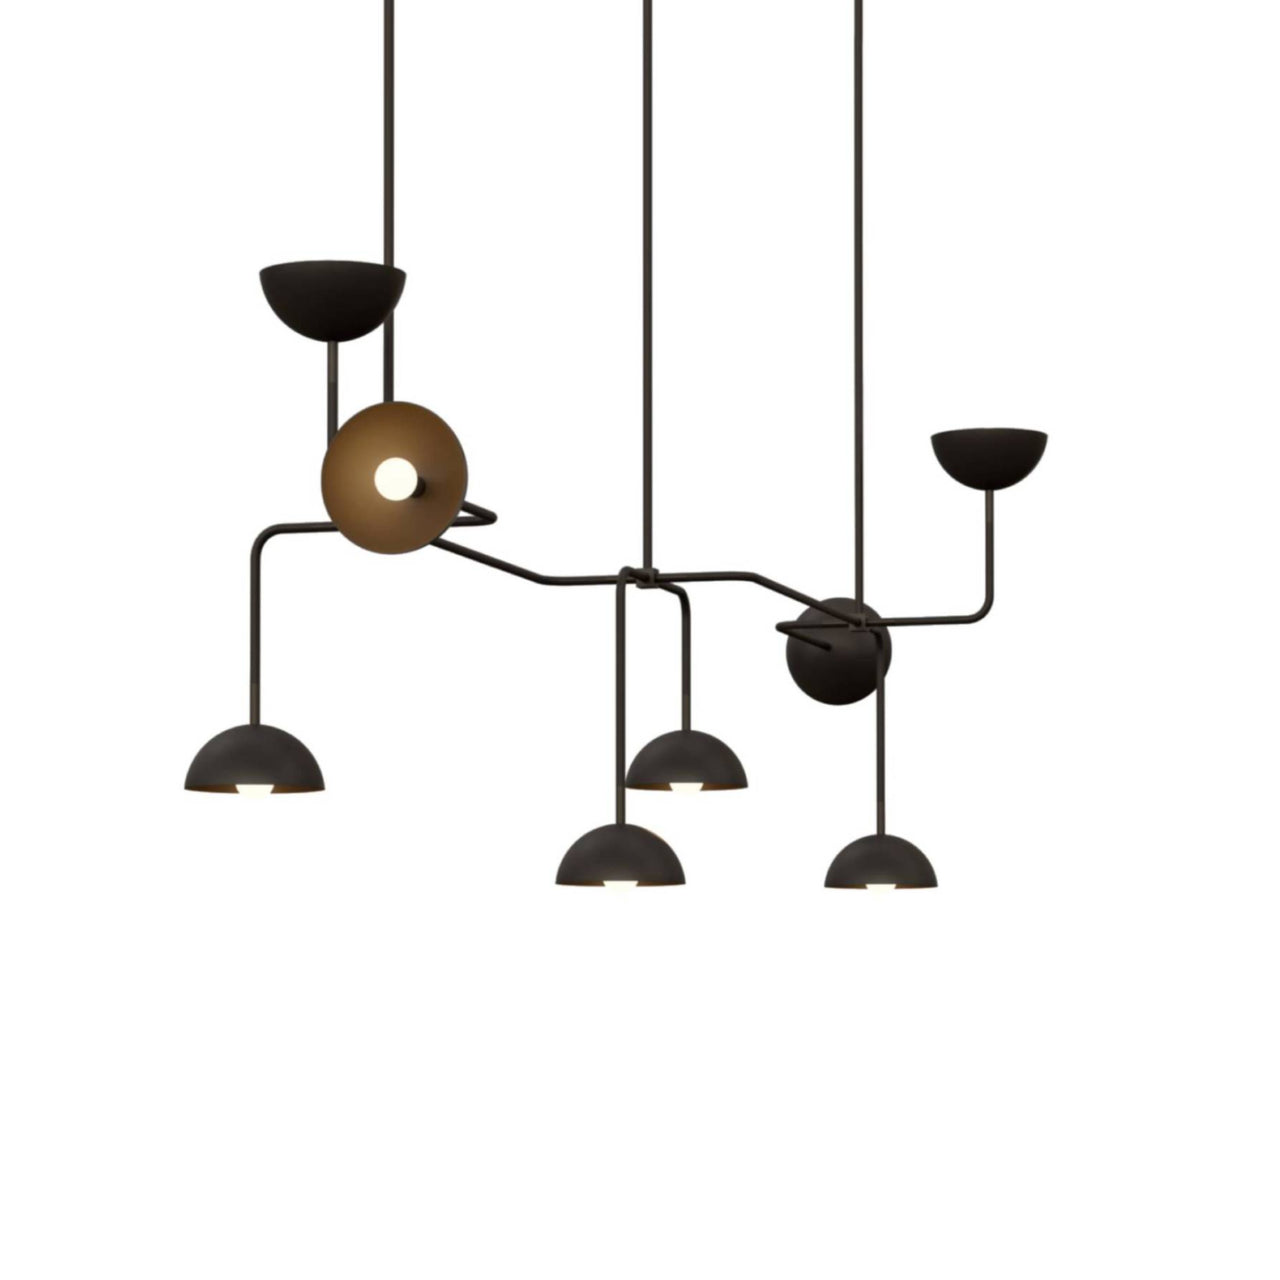 Beaubien Suspension 09 Lamp with Domes: Graphite